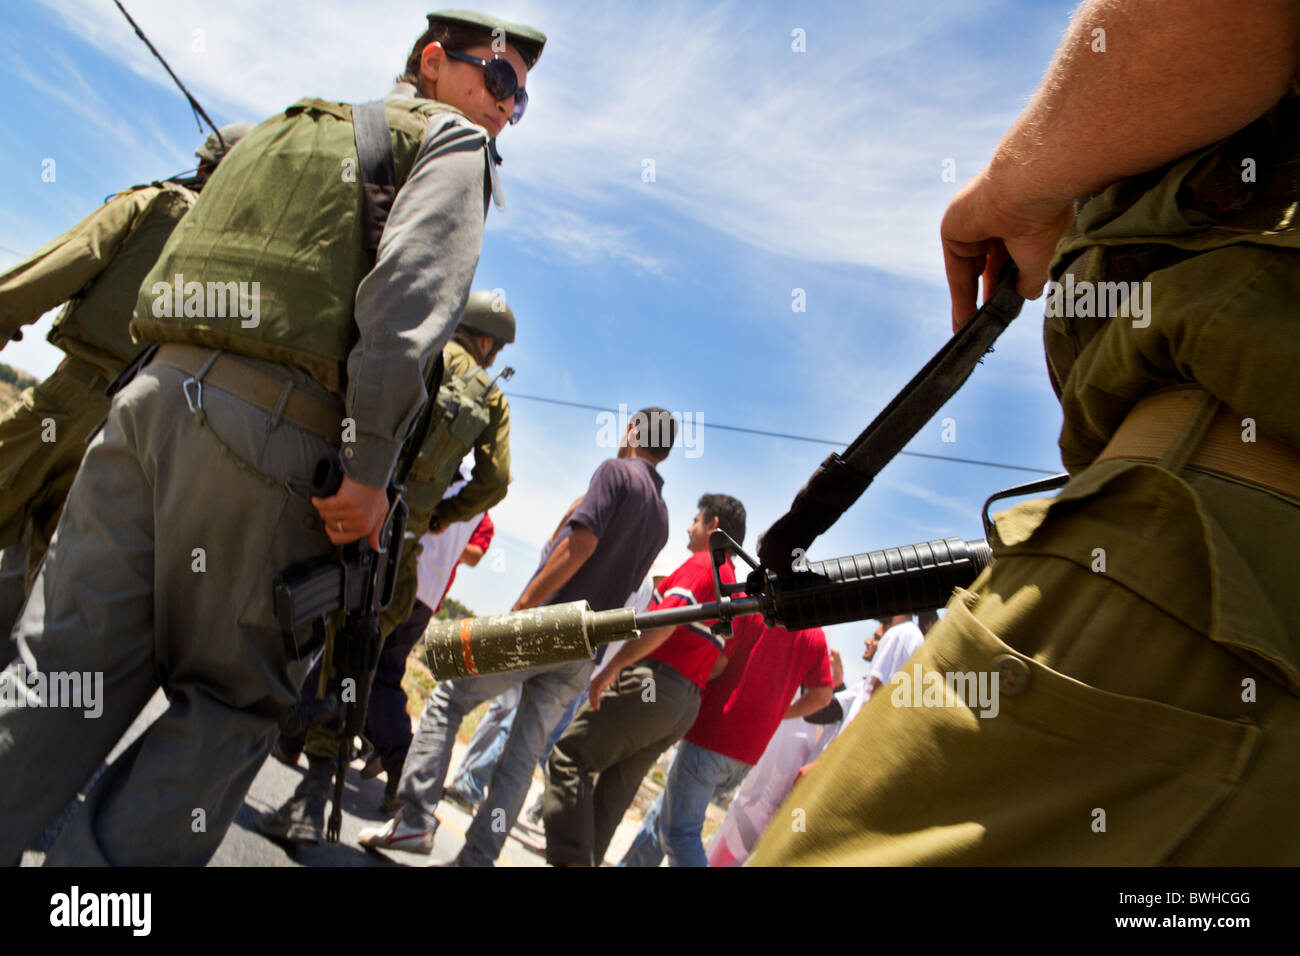 Palestinian people demonstrating against the extension of the apartheid wall near Al Masara, Palestine Stock Photo